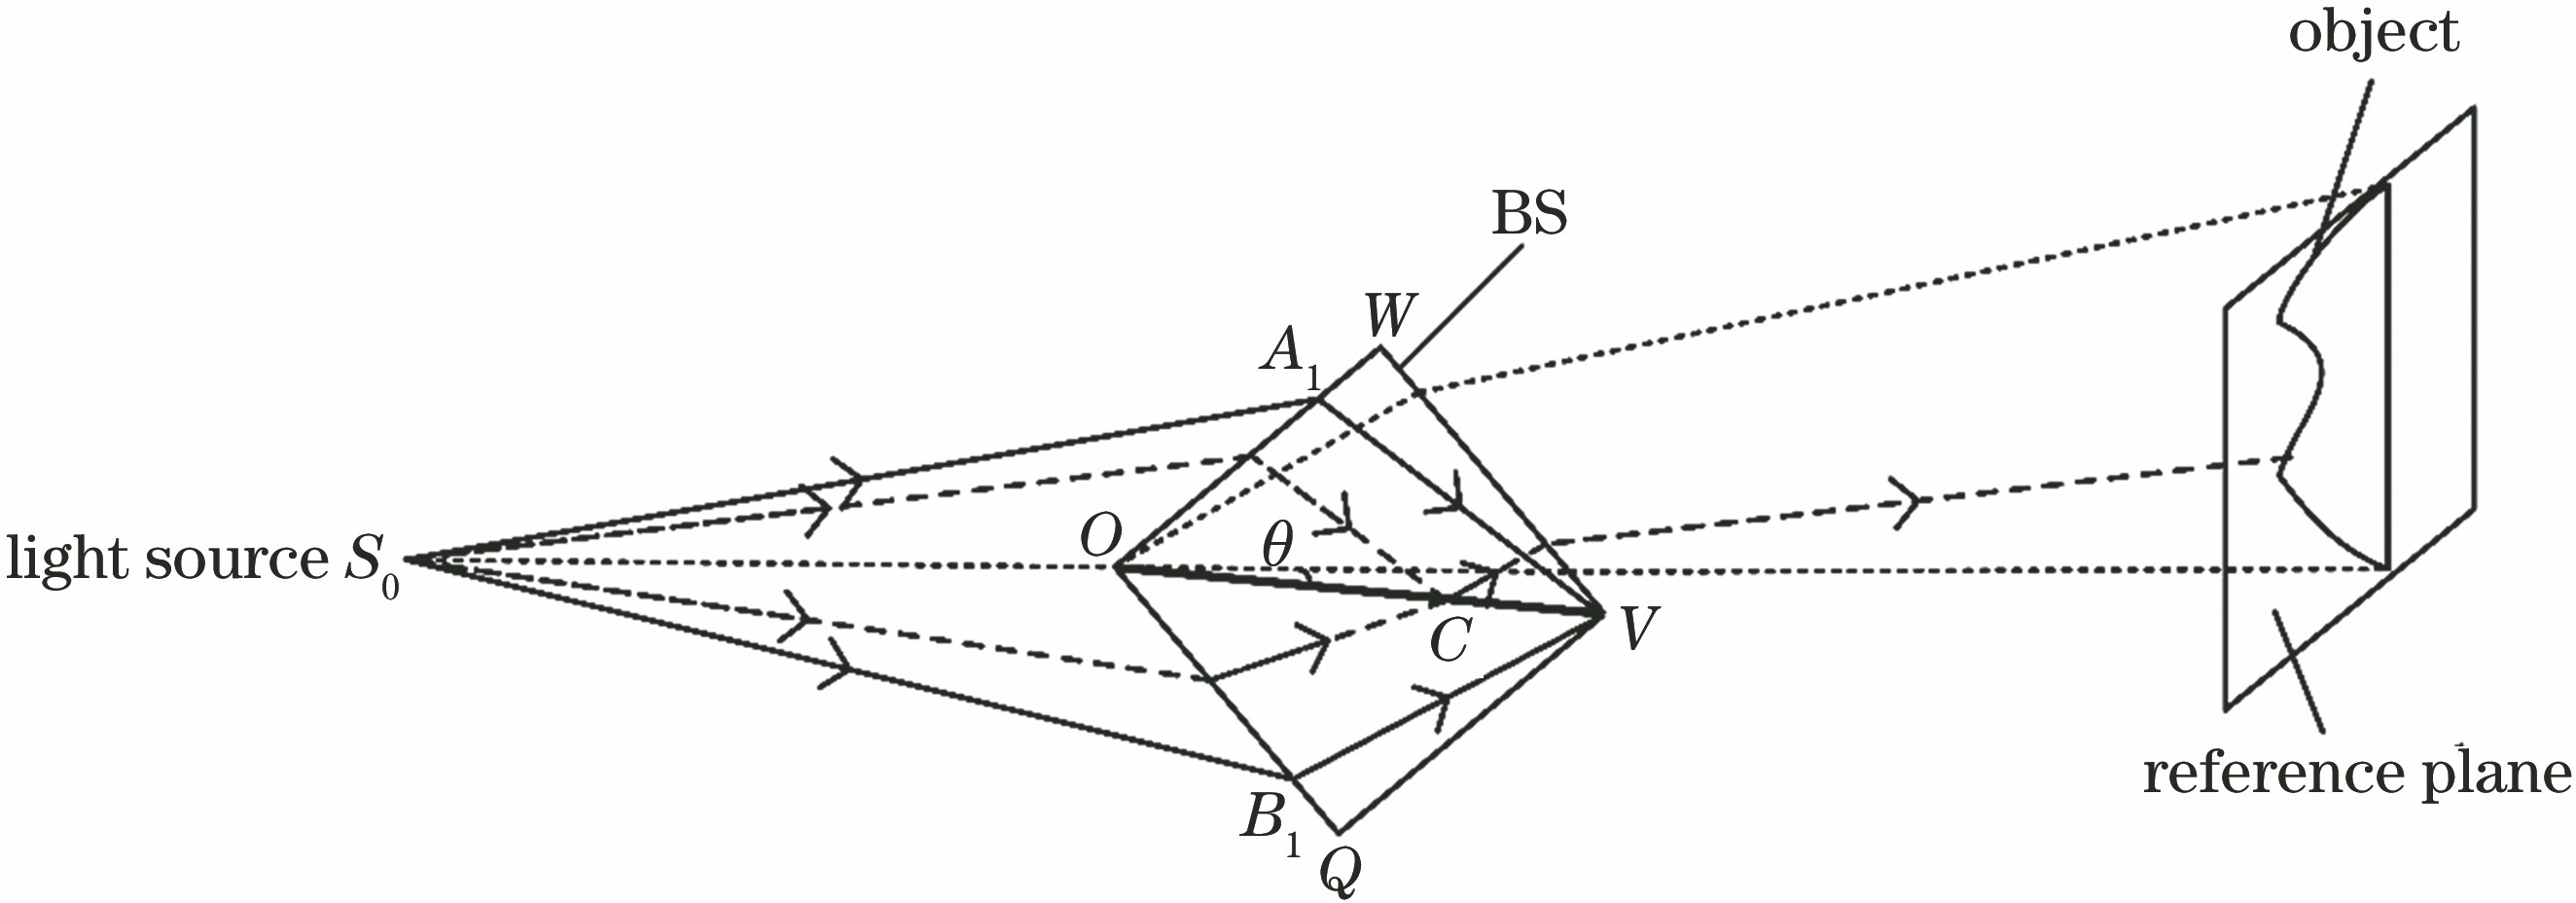 Schematic of common optical path interference